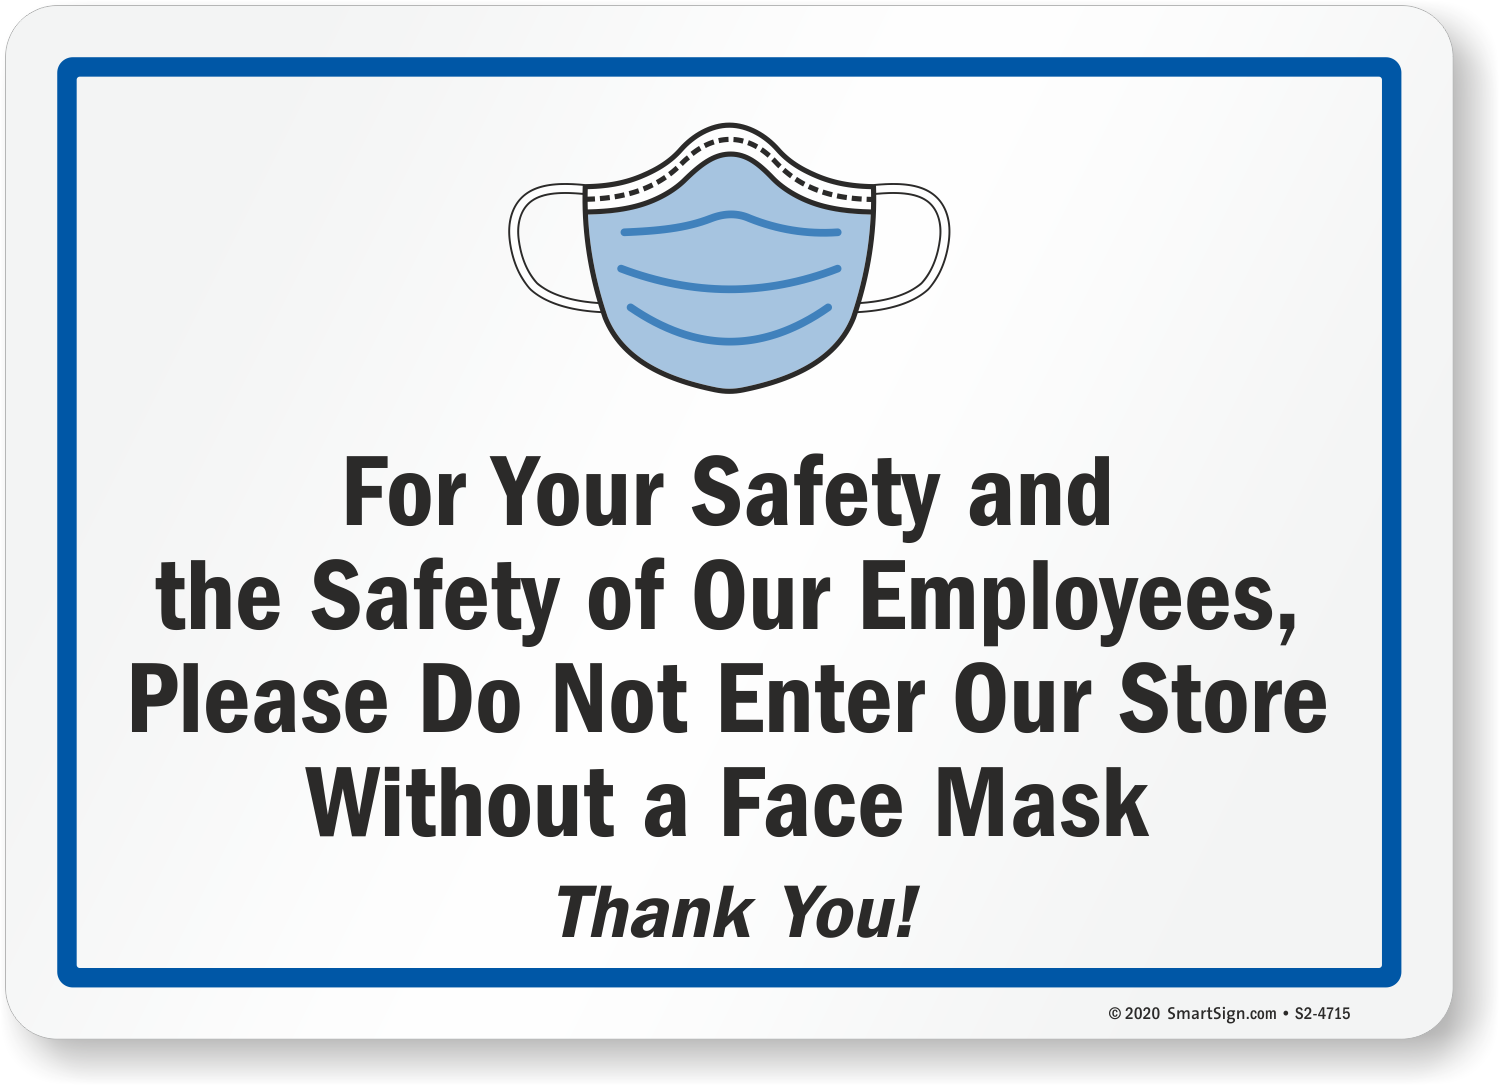 Please Do Not Enter Our Store Without A Face Mask Sign Sku S2 4715